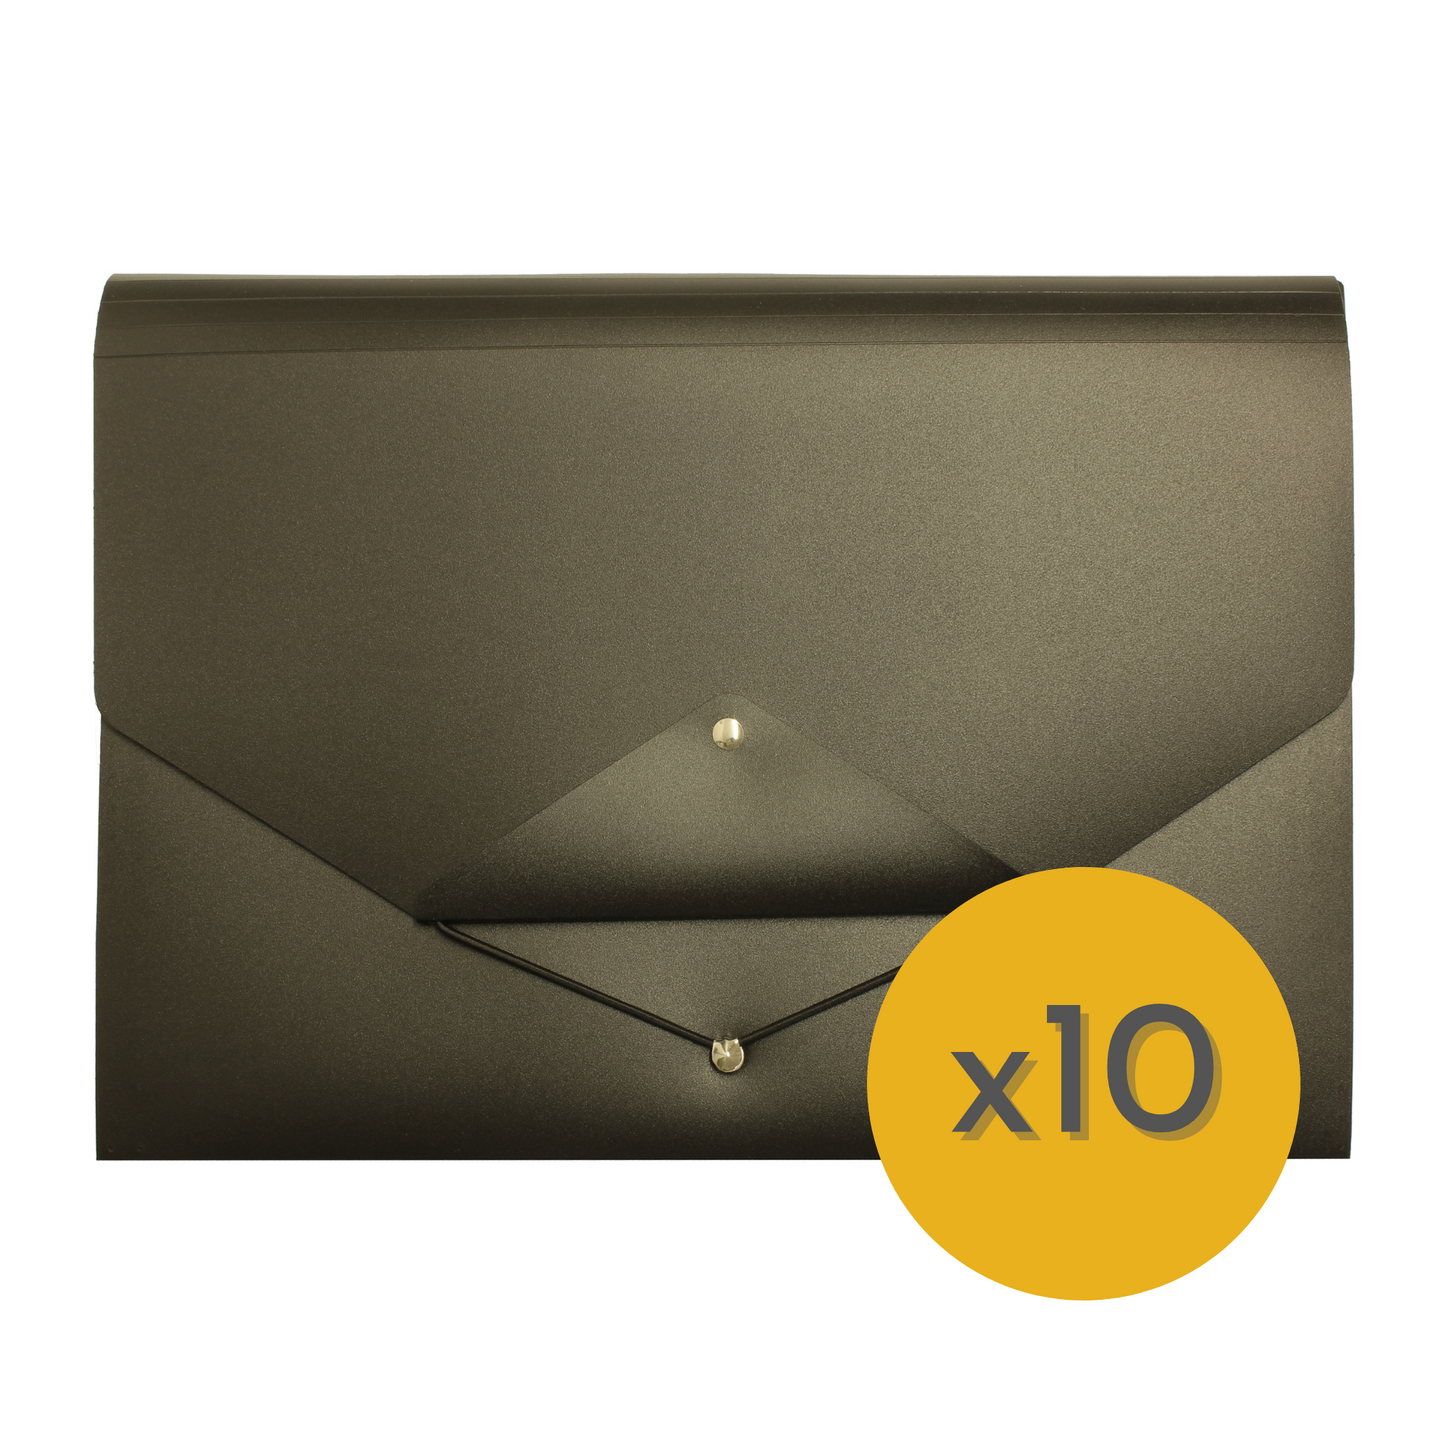 A black polypropylene expanding file with a black elastic closure, accompanied by a yellow circle graphic with 'x10' indicating it is part of a value bundle.